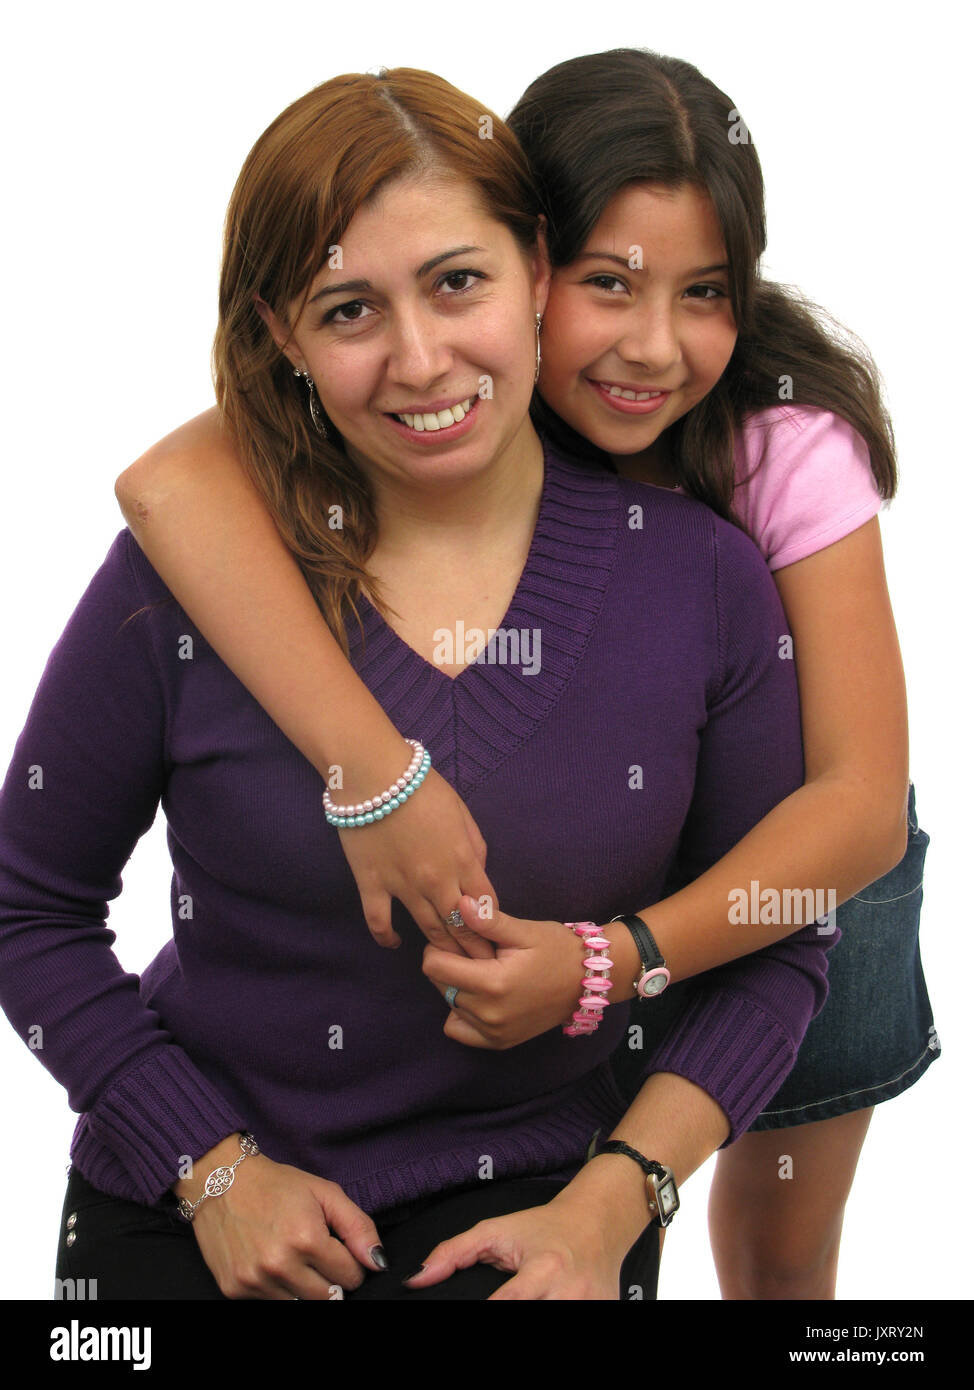 Family hug and fun over white backgrounds Stock Photo